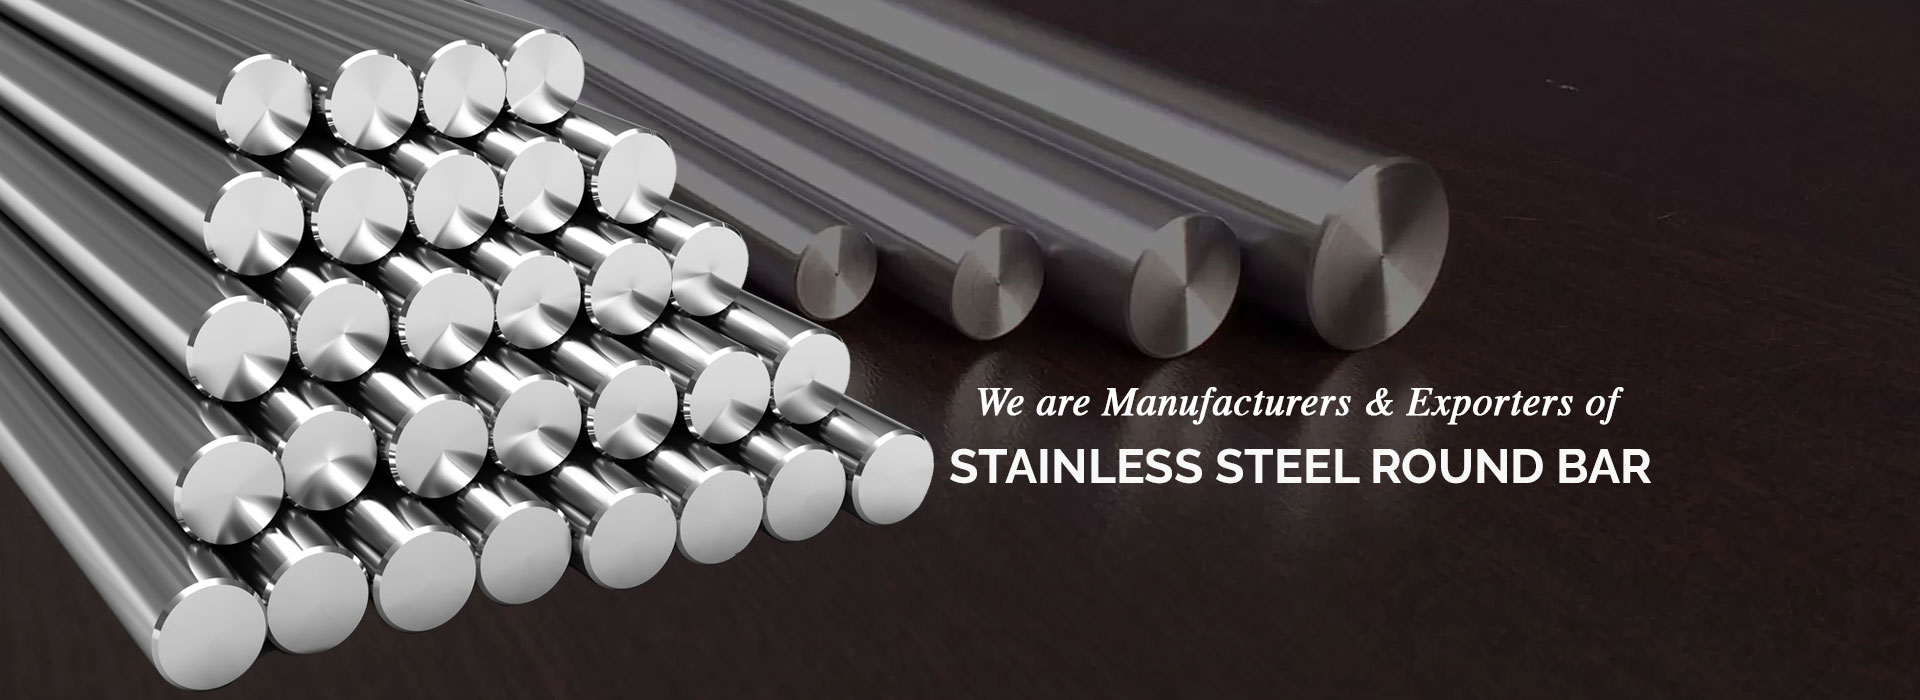 Stainless Steel Round Bar Manufacturers in Malaysia